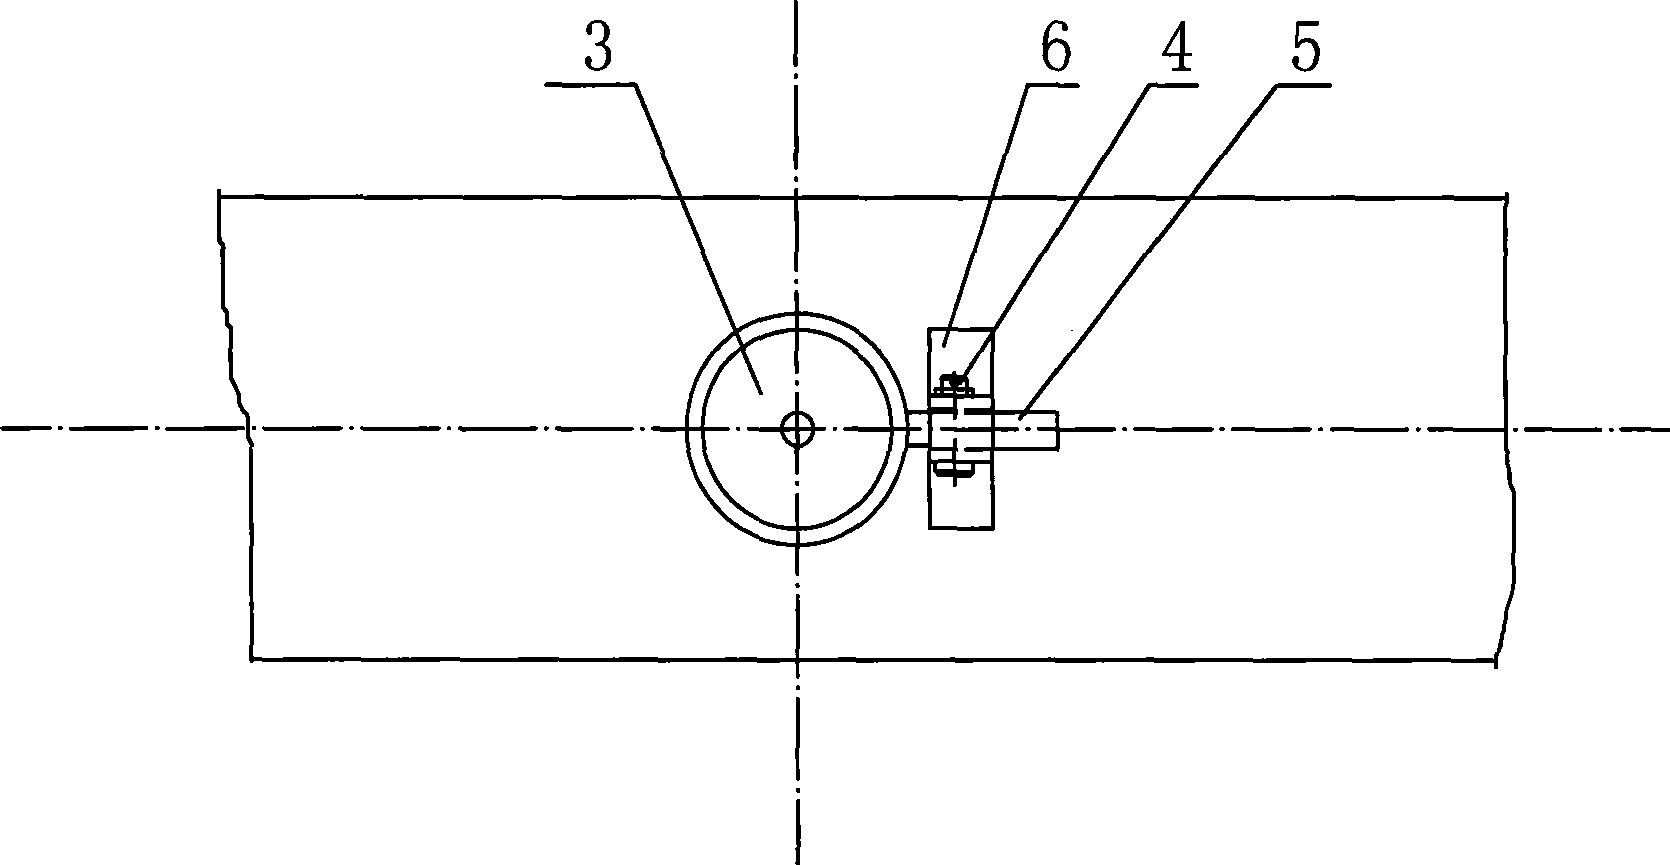 Axial spacing stopper pin device